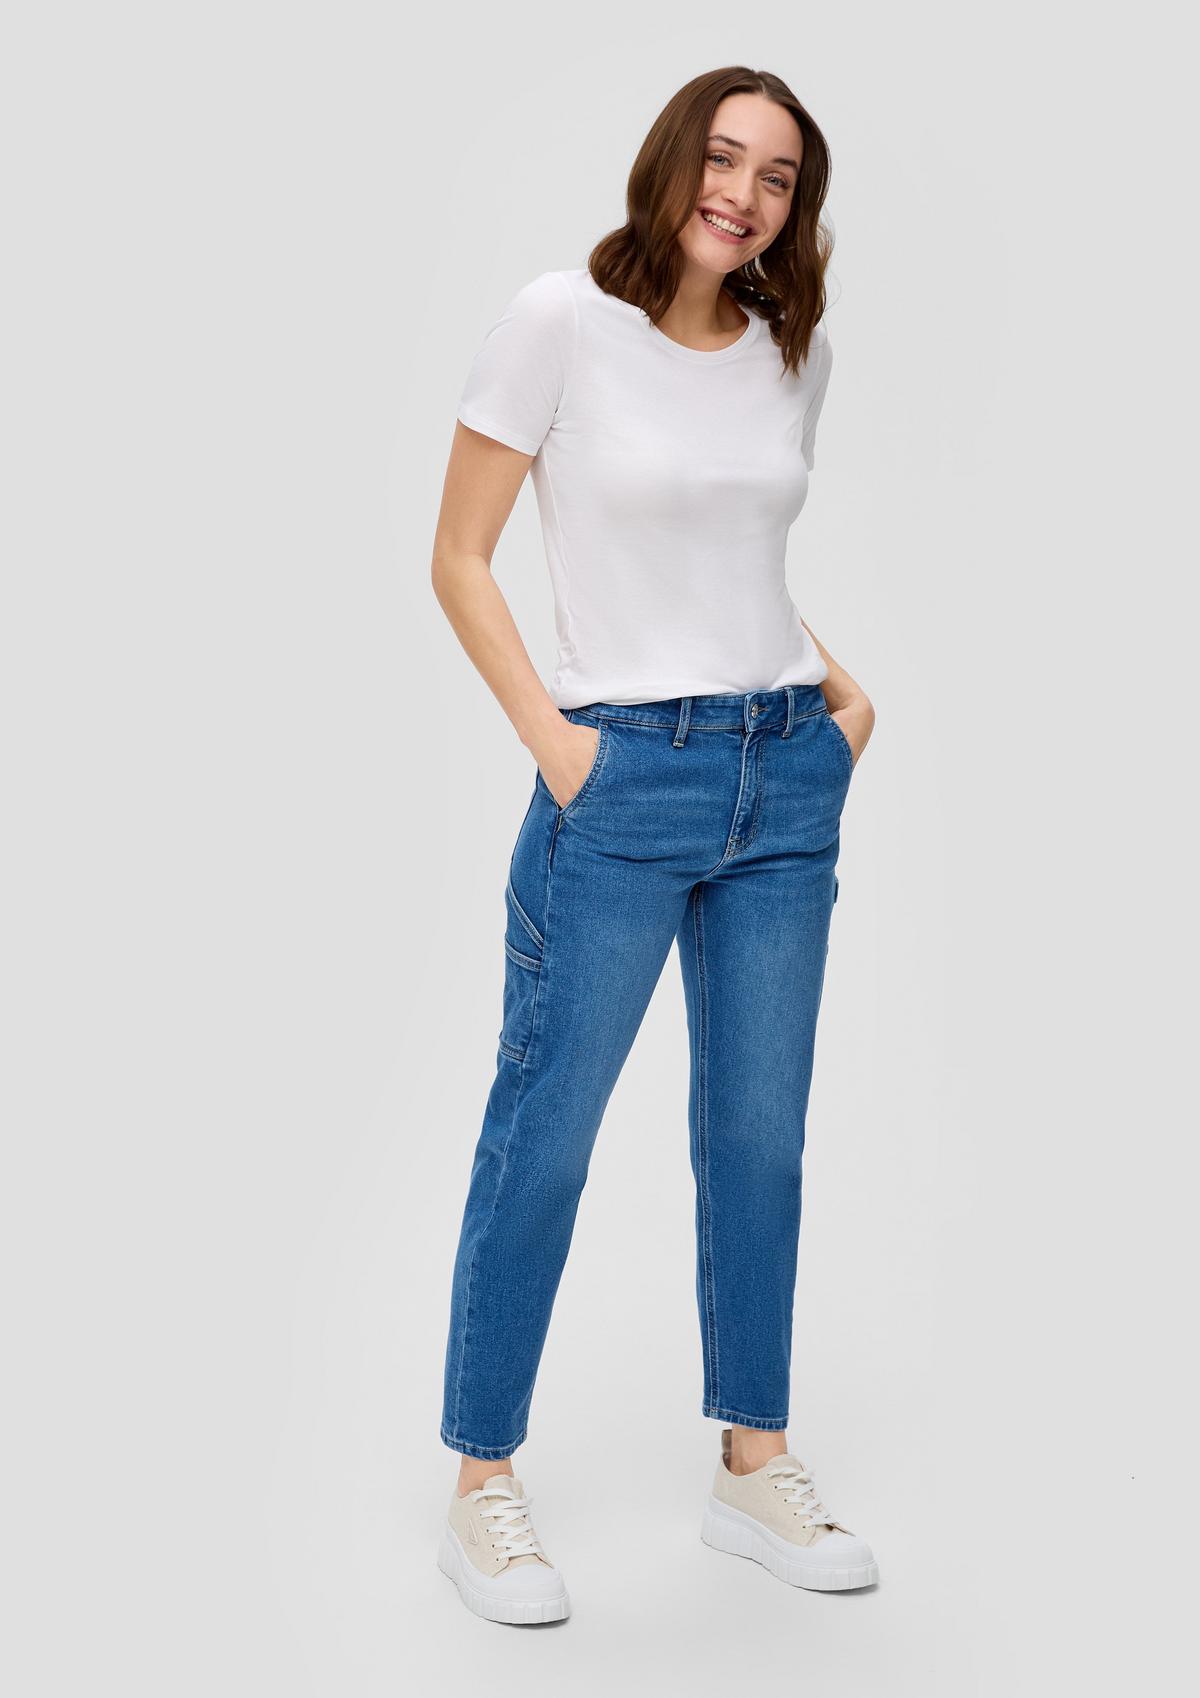 360° Denim / Ankle Jeans Francis / Relaxed Fit / Mid Rise / Tapered Leg / Boyfriend